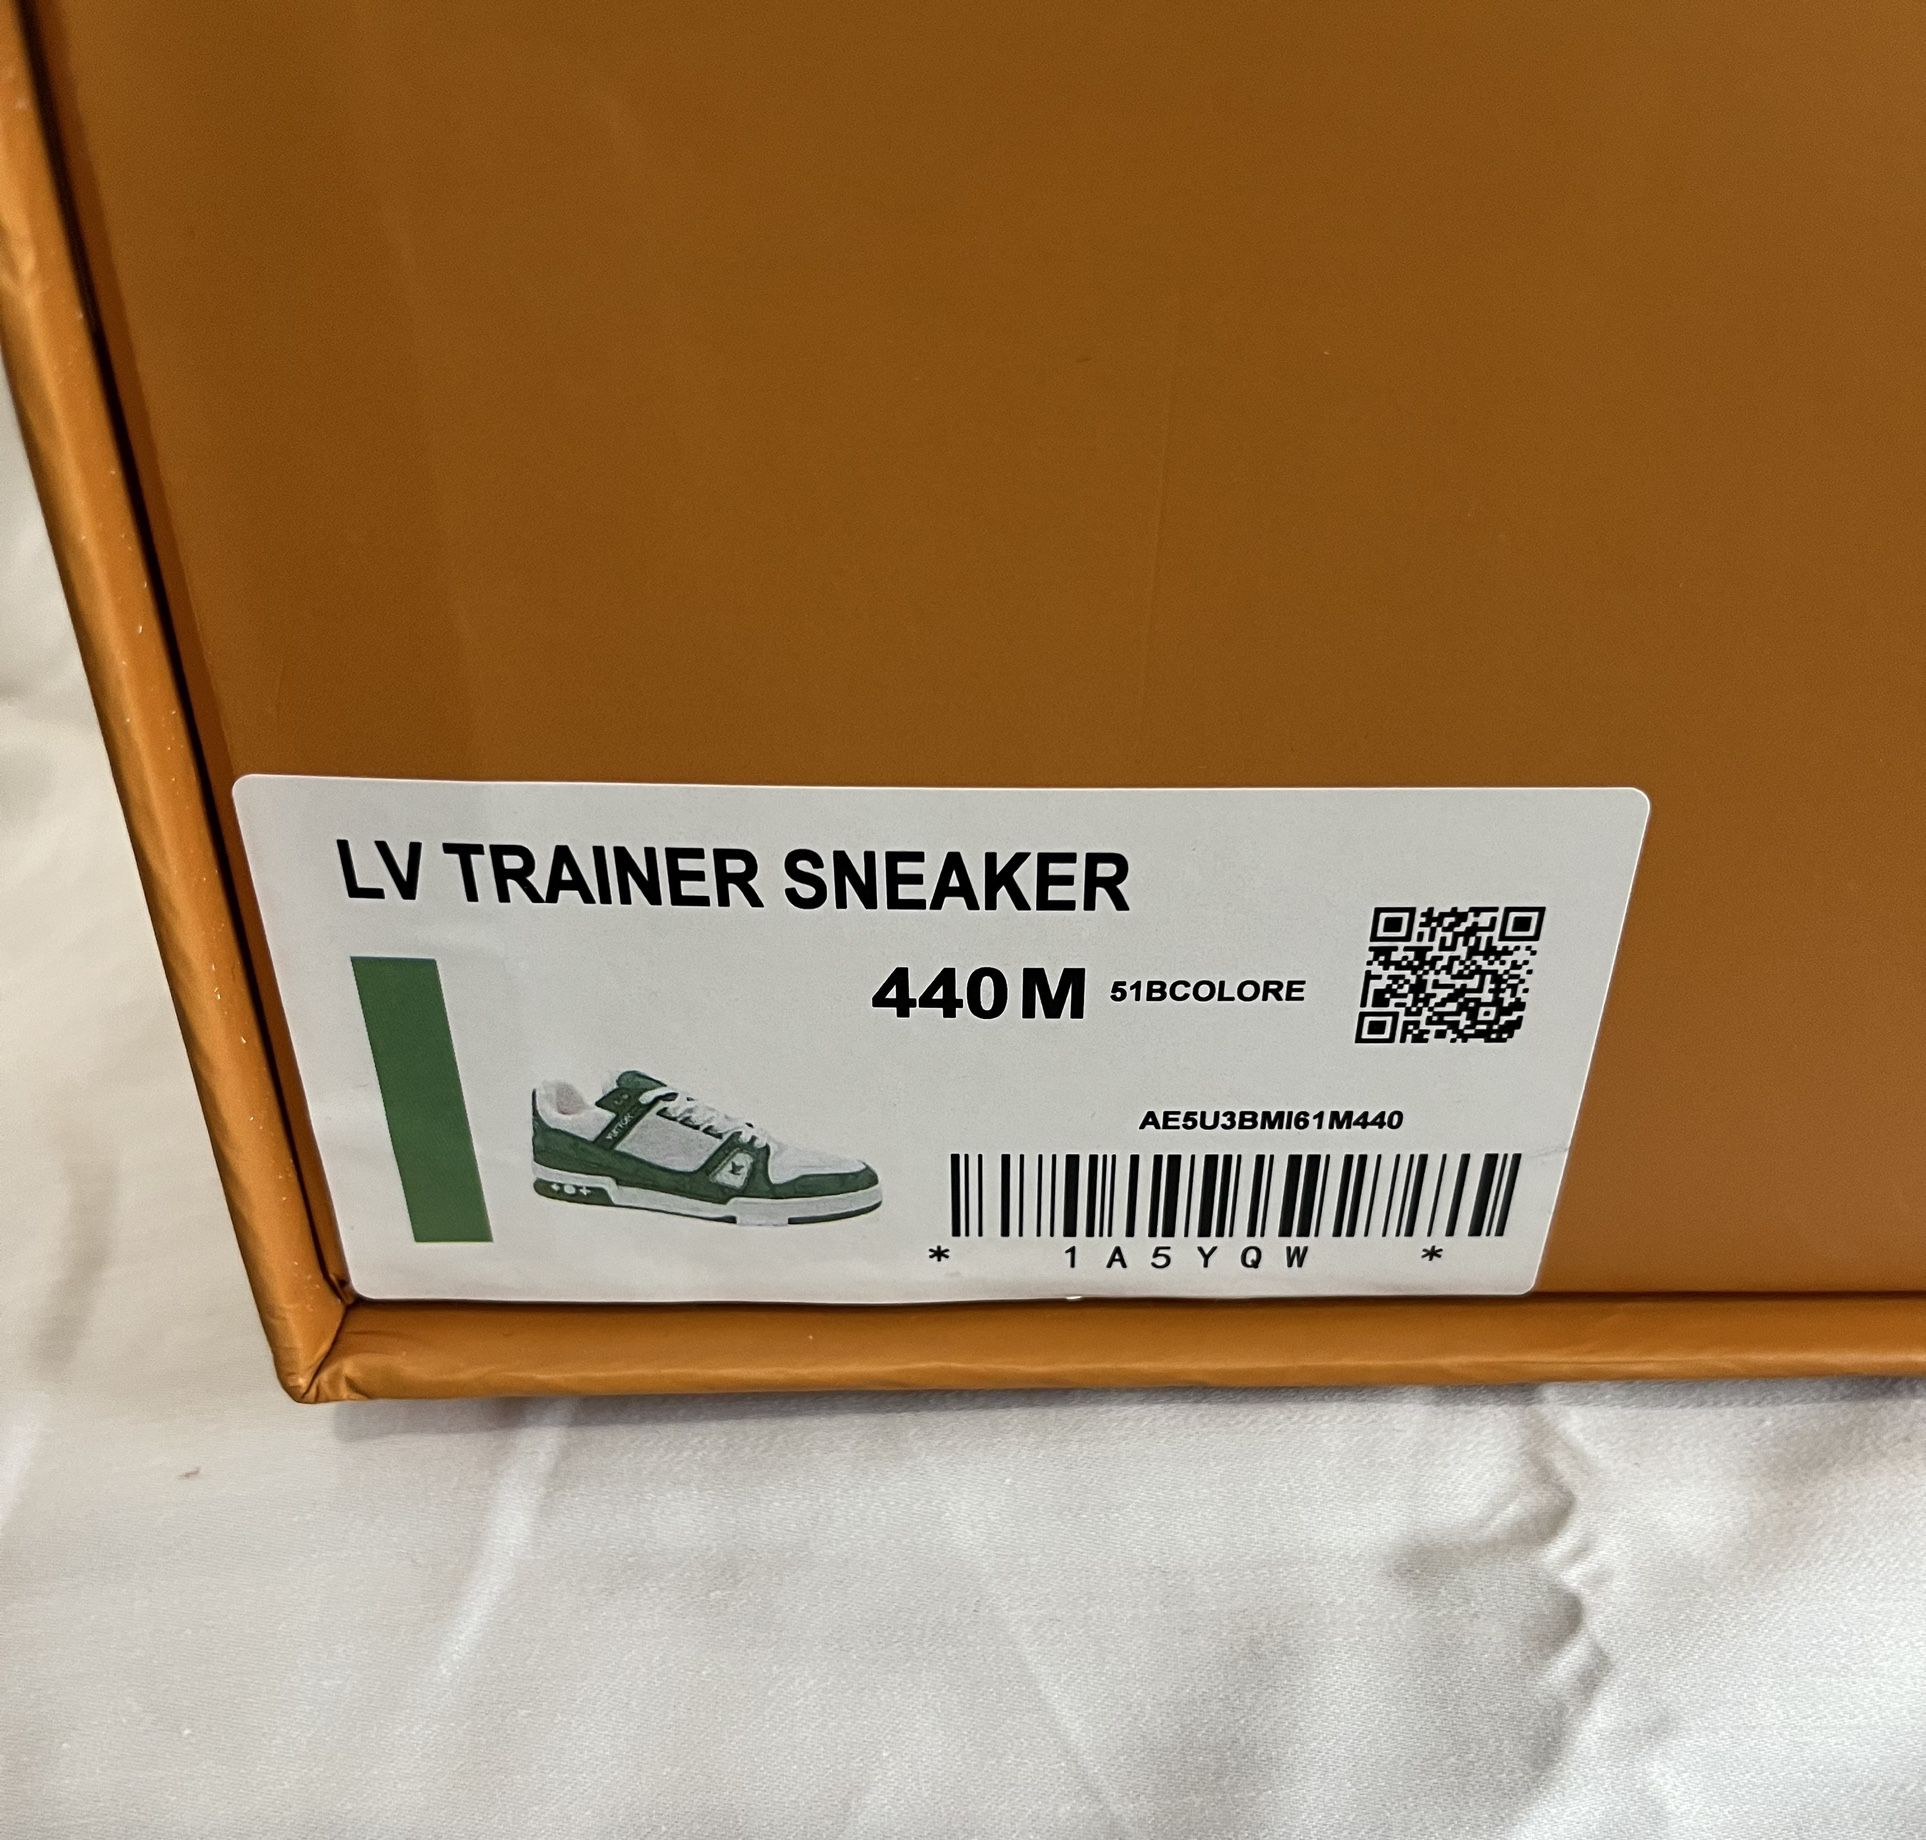 New Louis Vuitton trainer graphic print Sneakers (Size: Euro 44, Men's 10-11)  for Sale in Valley Stream, NY - OfferUp